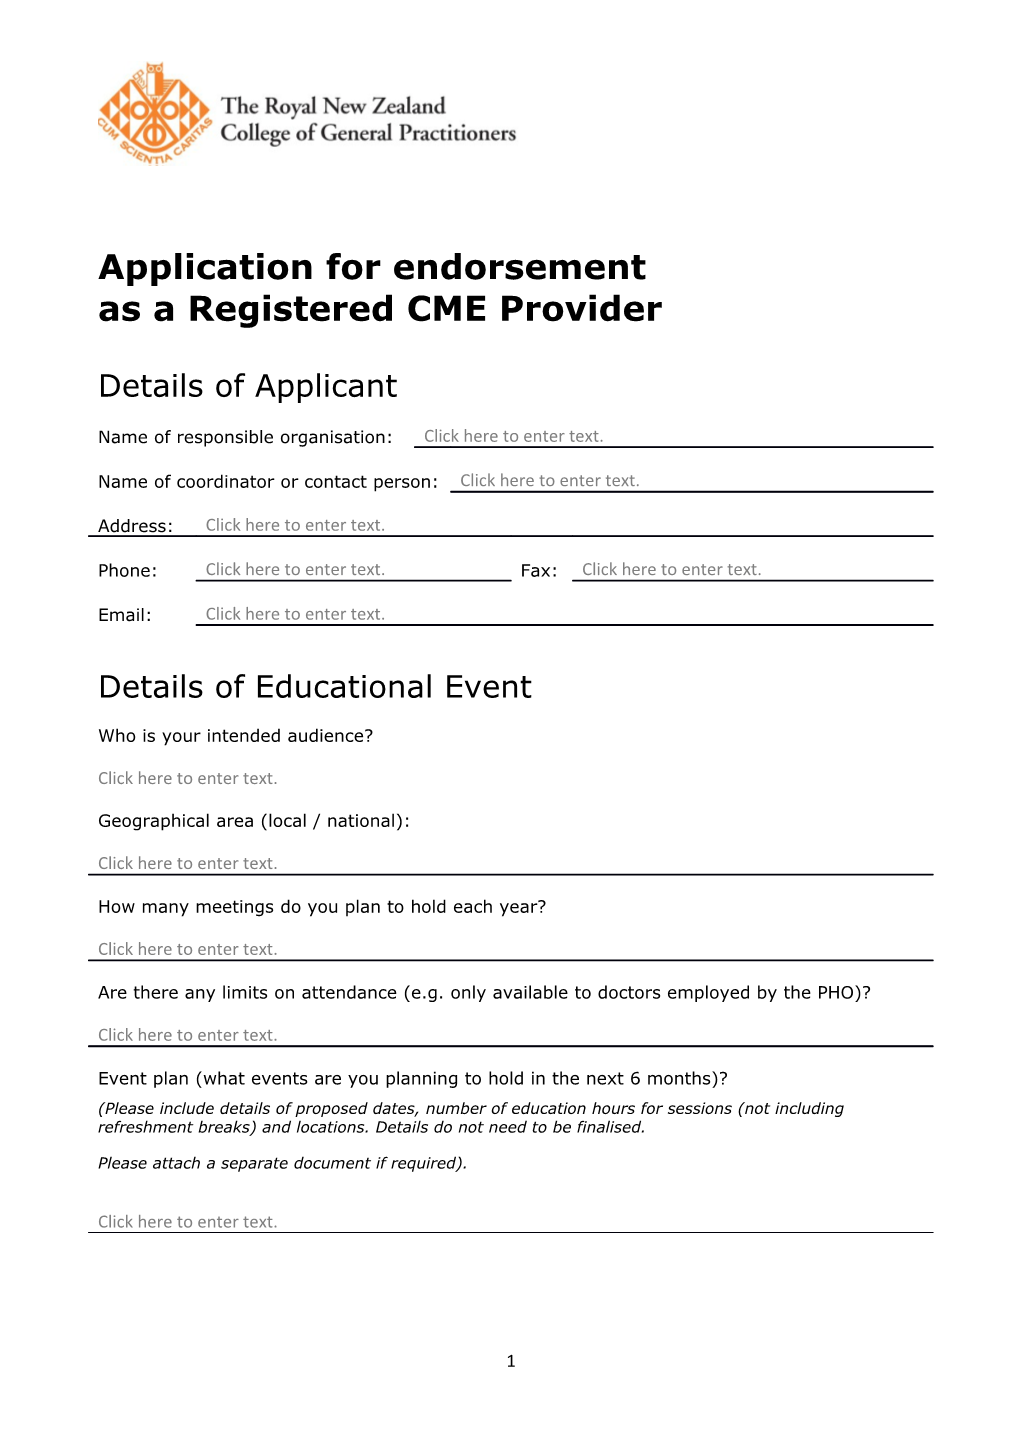 Application for Endorsement As a Registered CME Provider